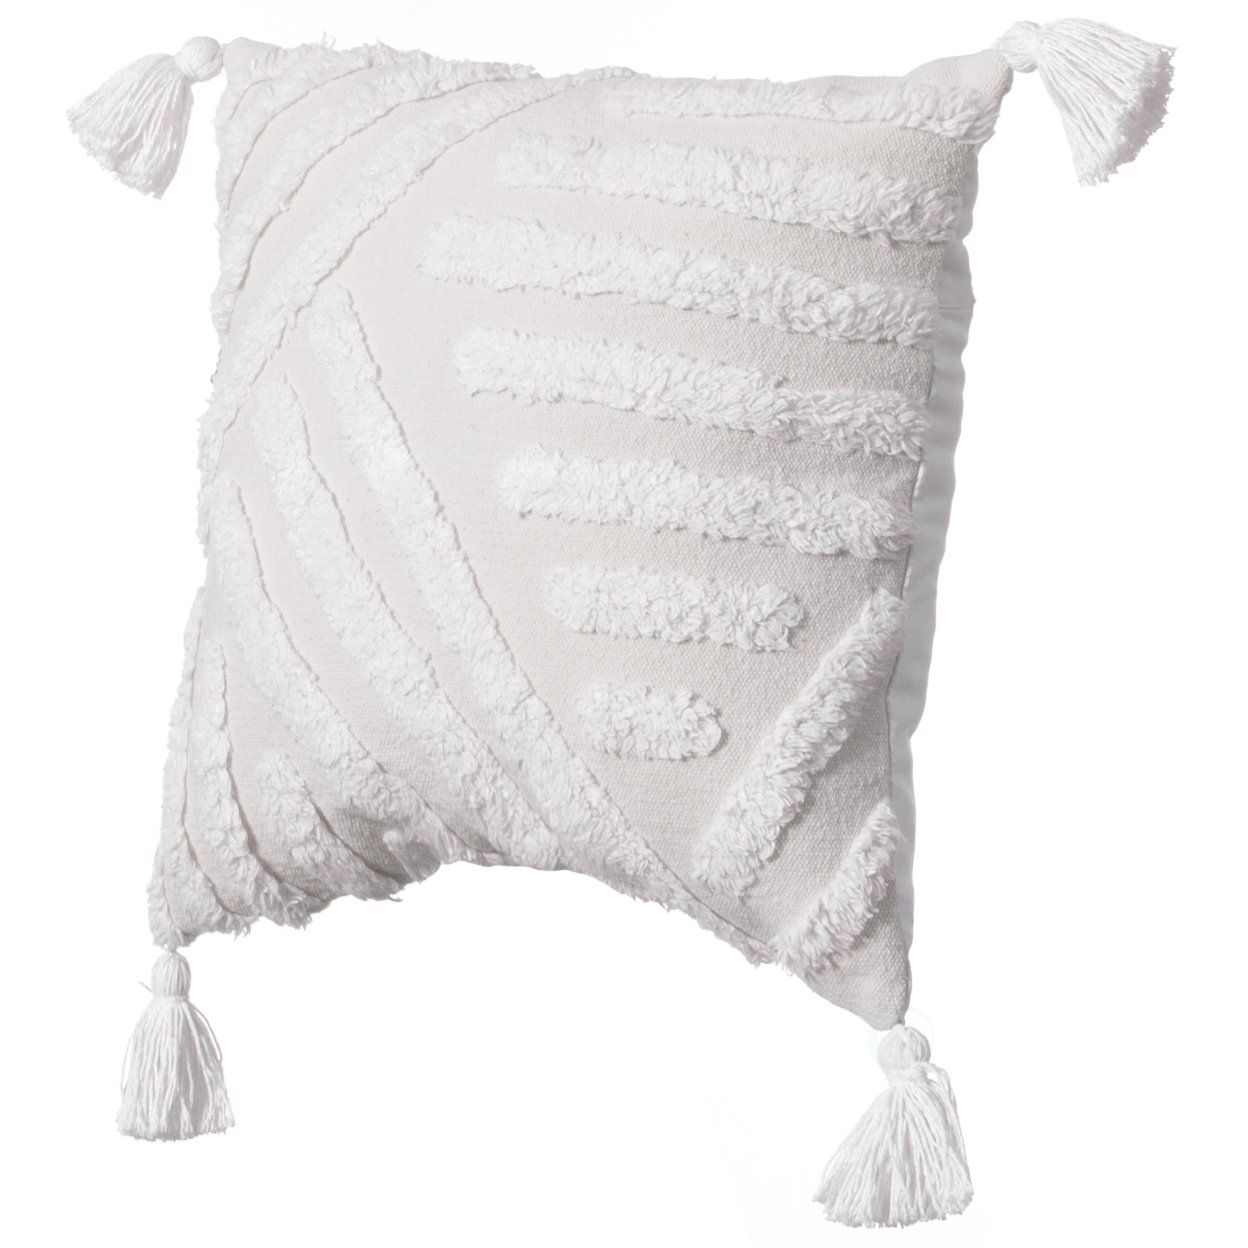 16 Handwoven Cotton Throw Pillow Cover With White Tufted Patterns And Tassel Corners - Line